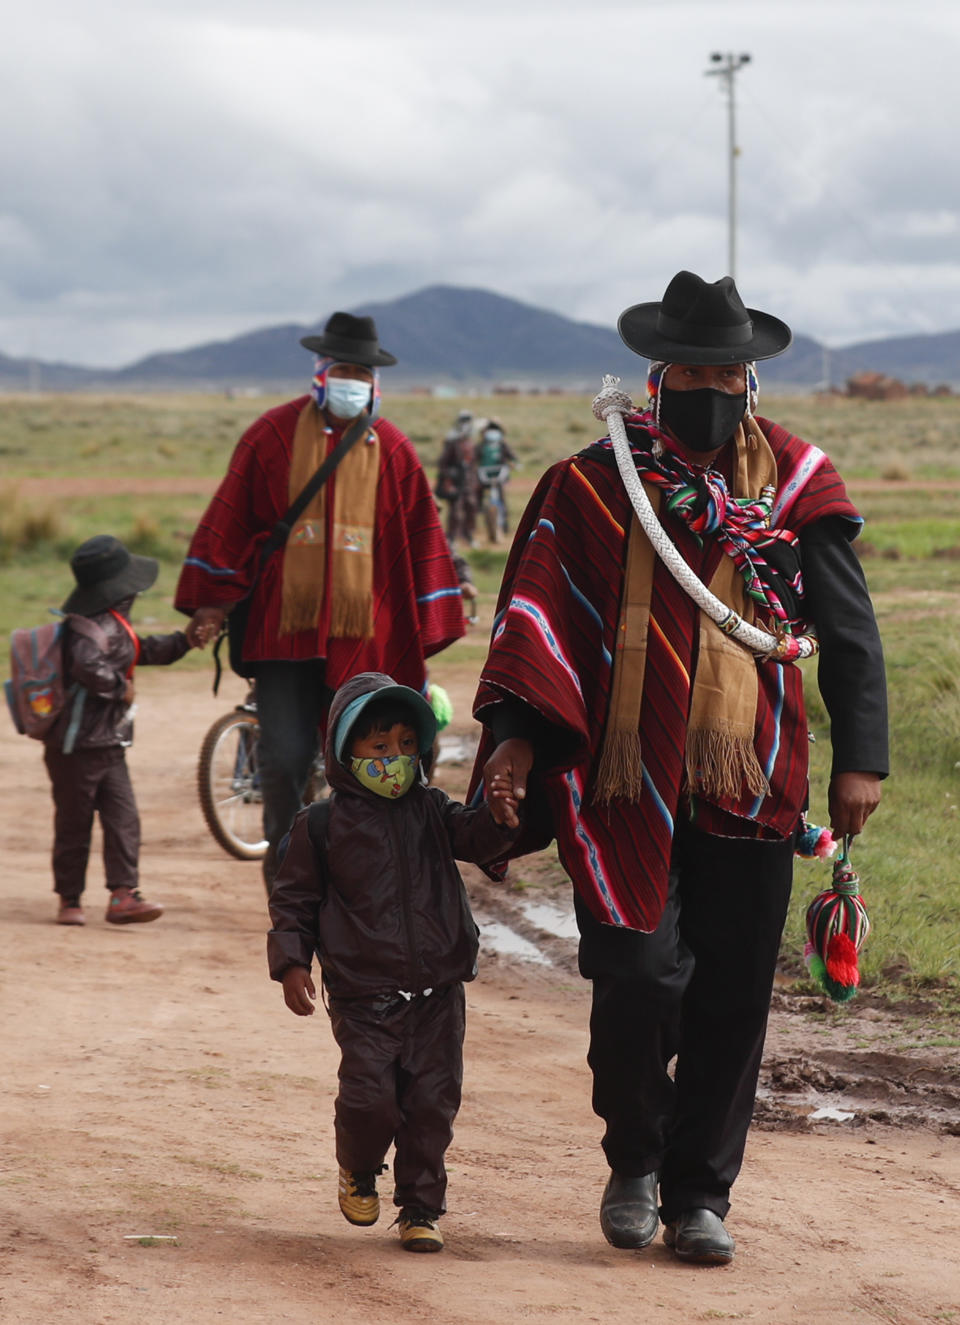 Aymara Indigenous fathers walk their children wearing new, protective uniforms amid the COVID-19 pandemic to Jancohaqui Tana school during their first week back to class amid the pandemic near Jesus de Machaca, Bolivia, early Thursday, Feb. 4, 2021. (AP Photo/Juan Karita)